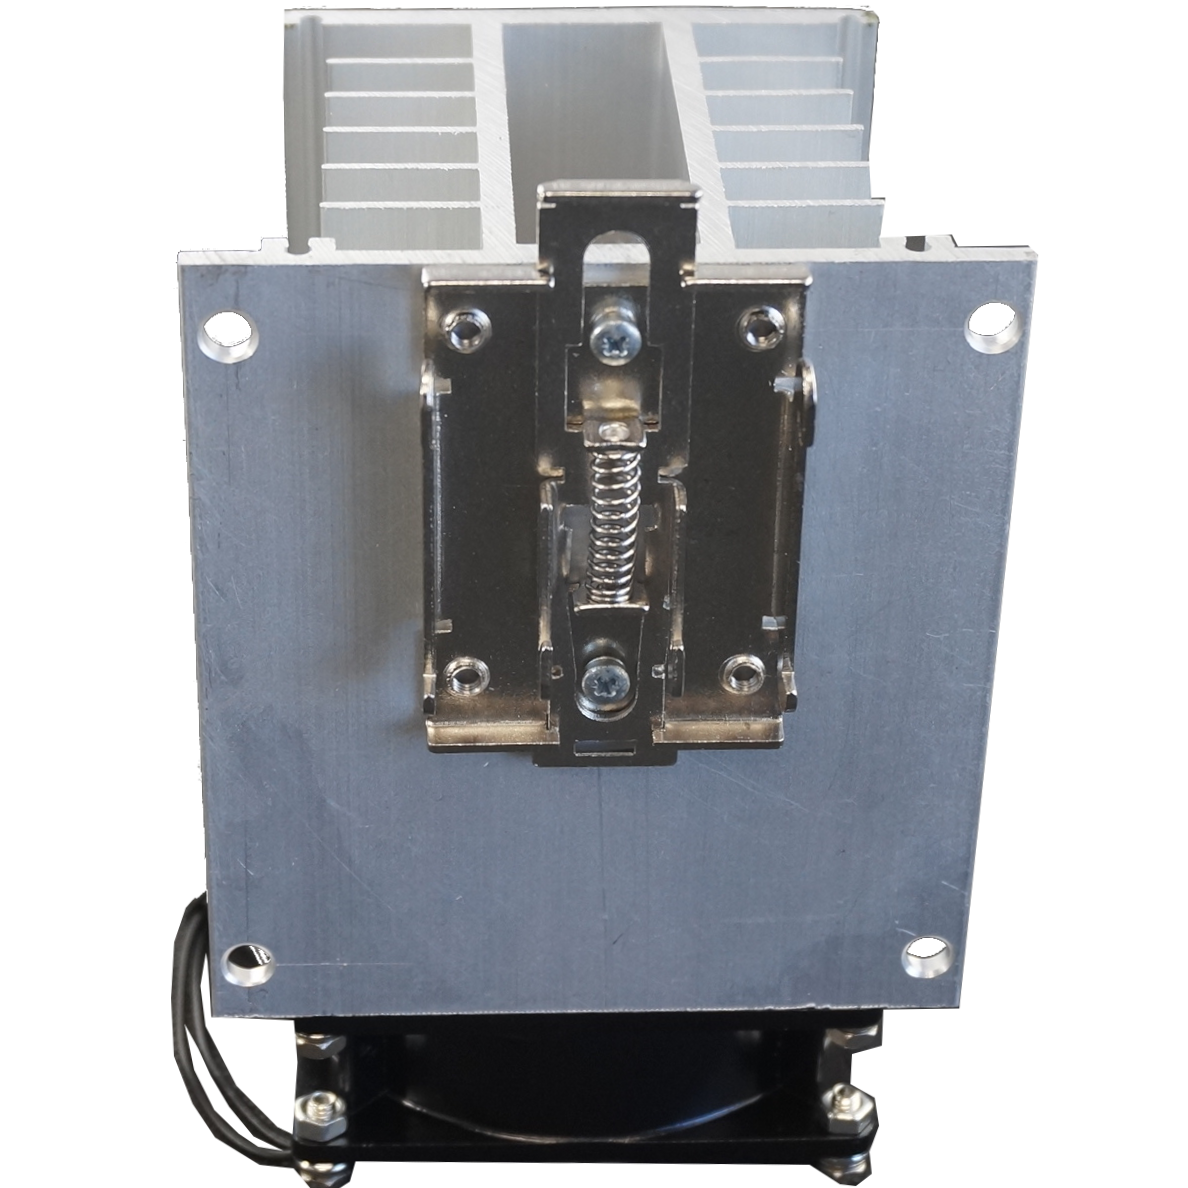 D53TP50D + HS212DR-F, Solid State Relay, and Heatsink Assembly, 3 Phase 4-32VDC Control, 36 Amp per phase @ 40 Deg C, 48-530VAC Load, LED Status Indicator